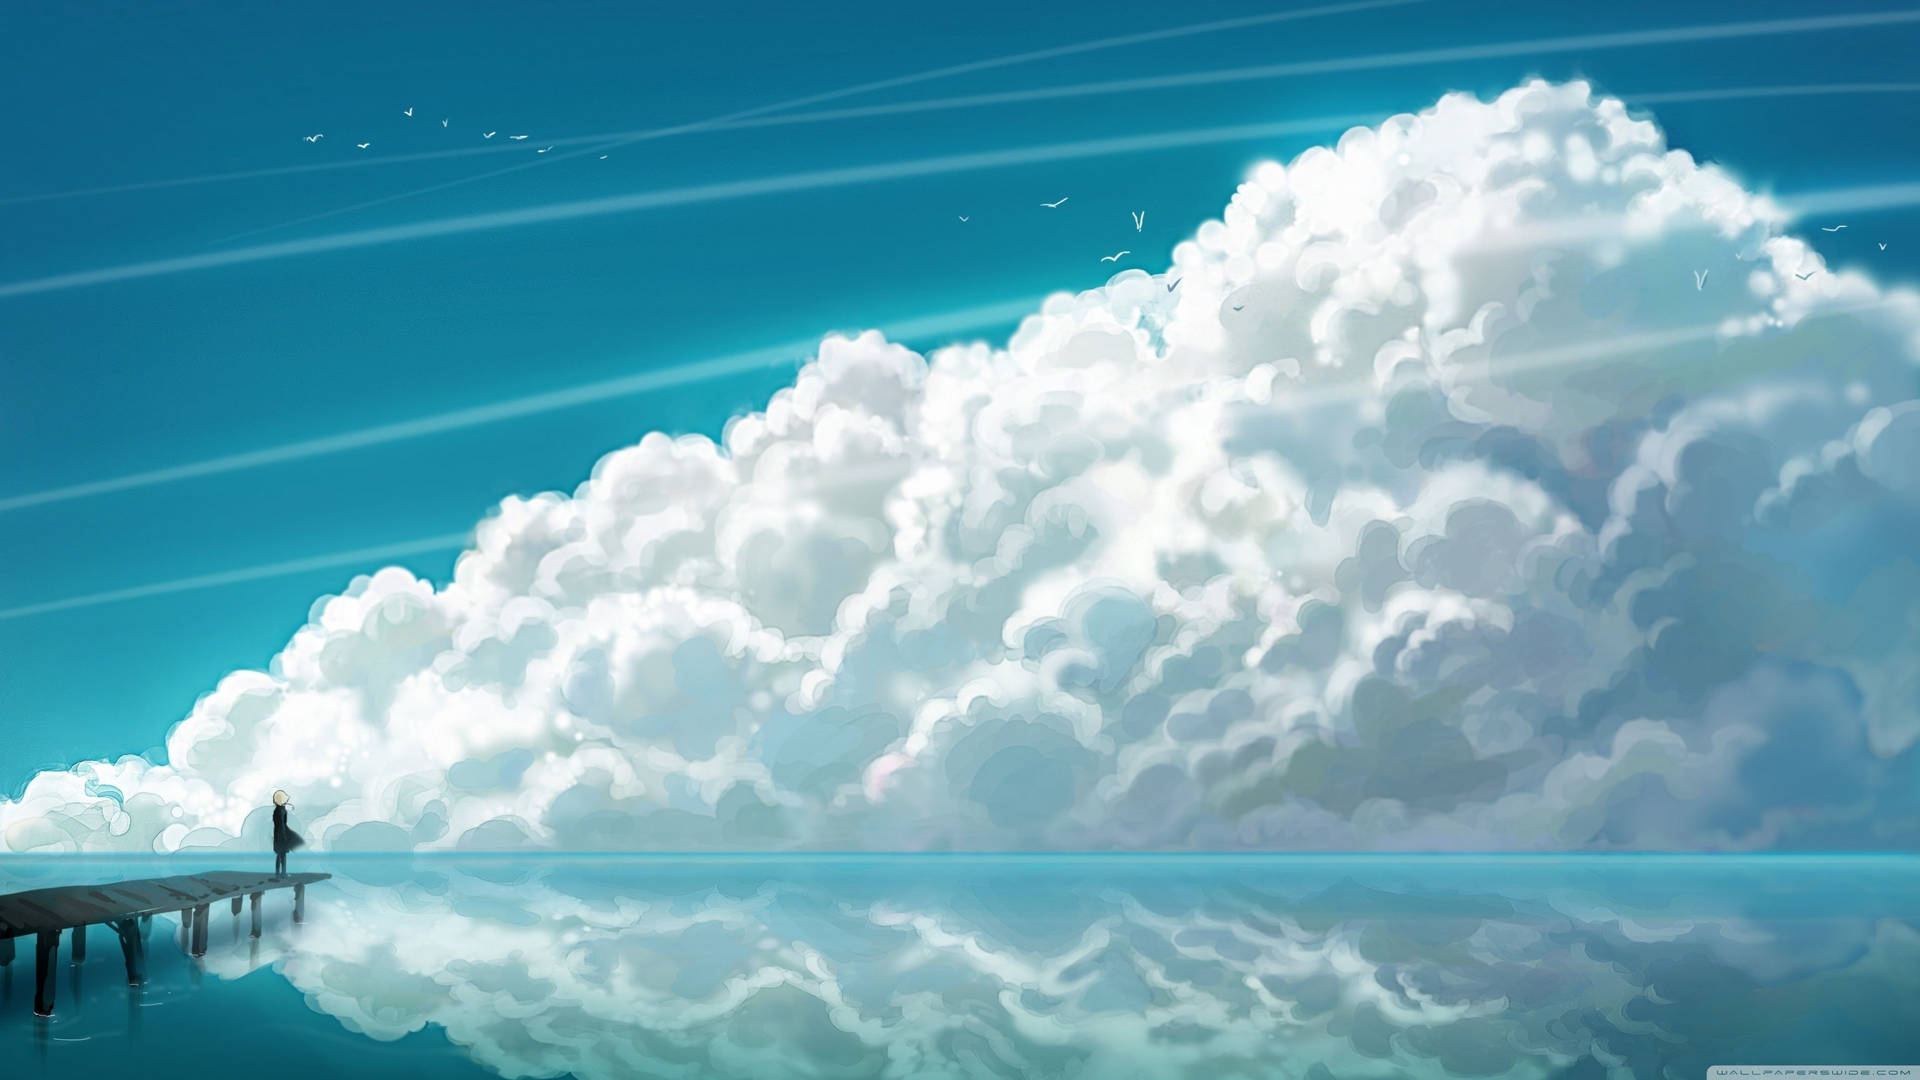 Take in a Breath of Fresh Air and Marvel at the Beauty of the Ocean and Clouds Wallpaper